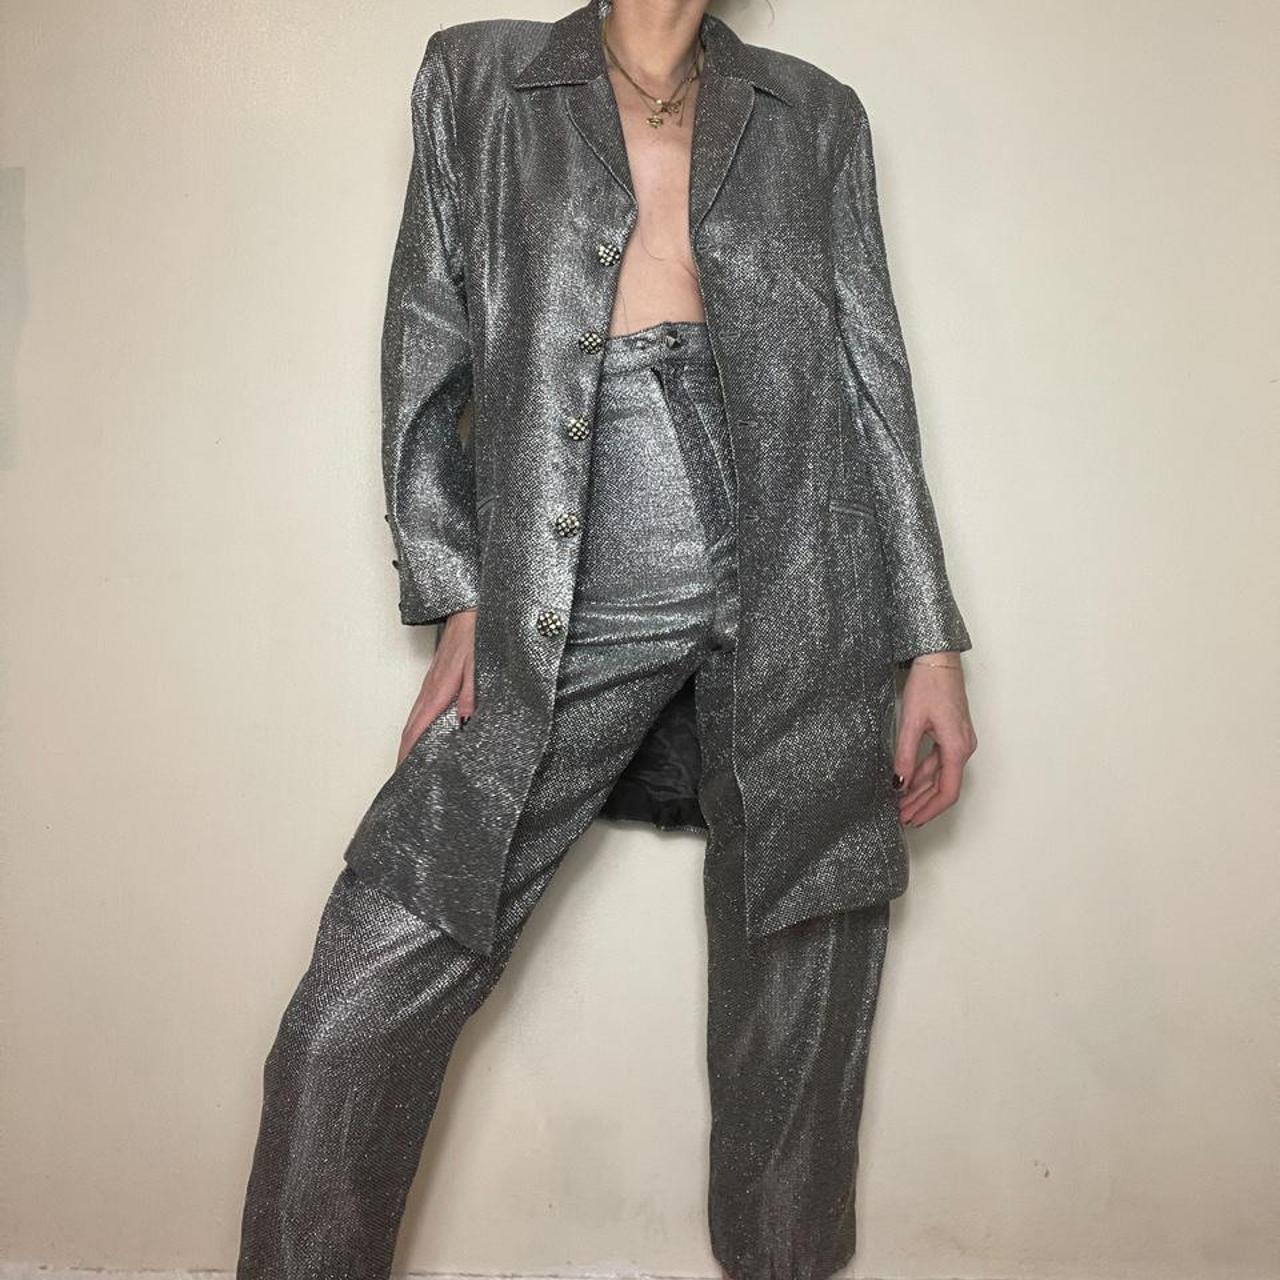 Product Image 1 - Vintage silver glitter matching suit.